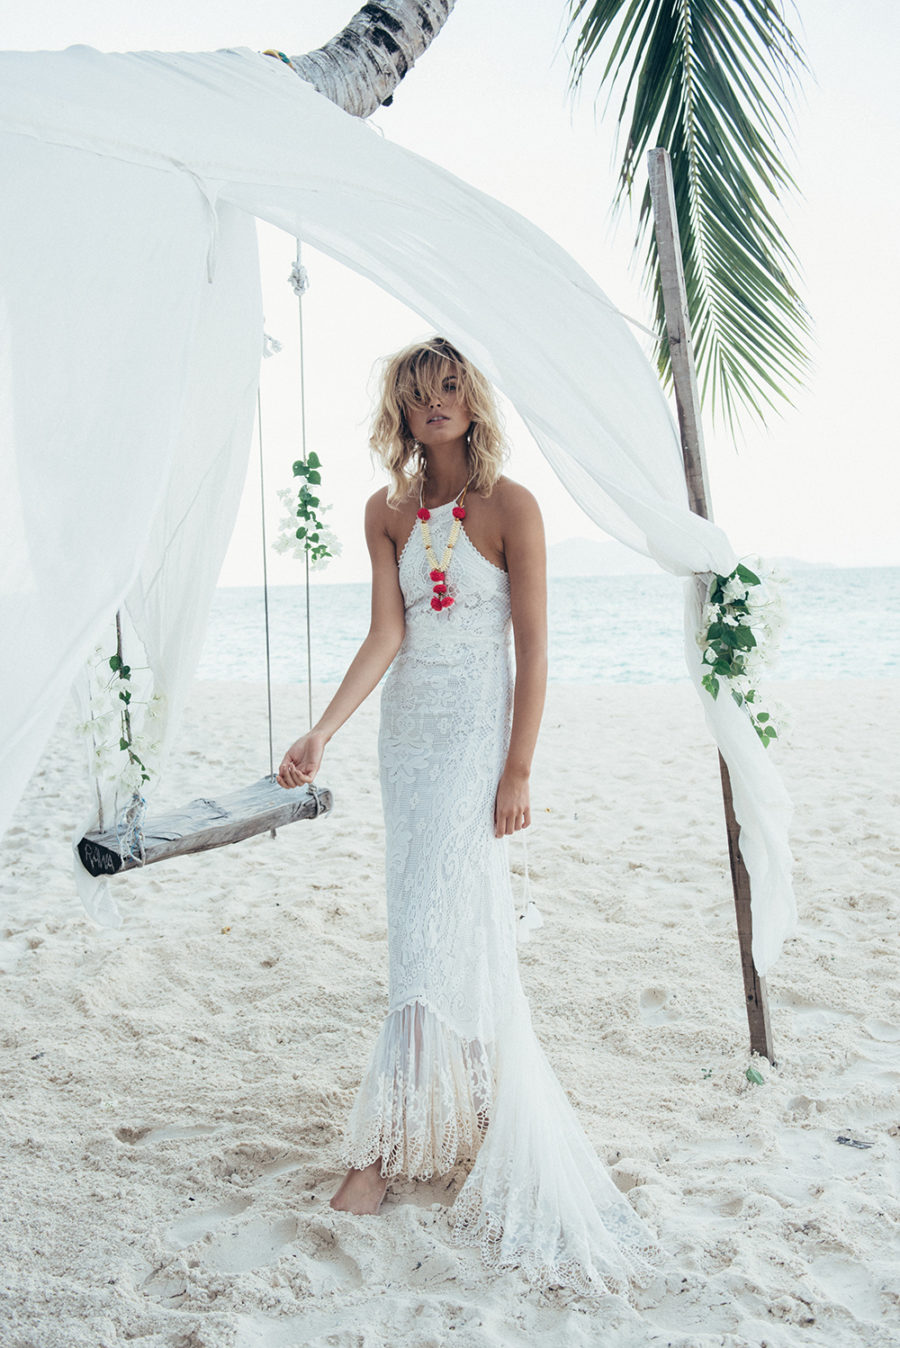 Where to Shop for the Best Affordable Wedding Dresses // Notjessfashion.com